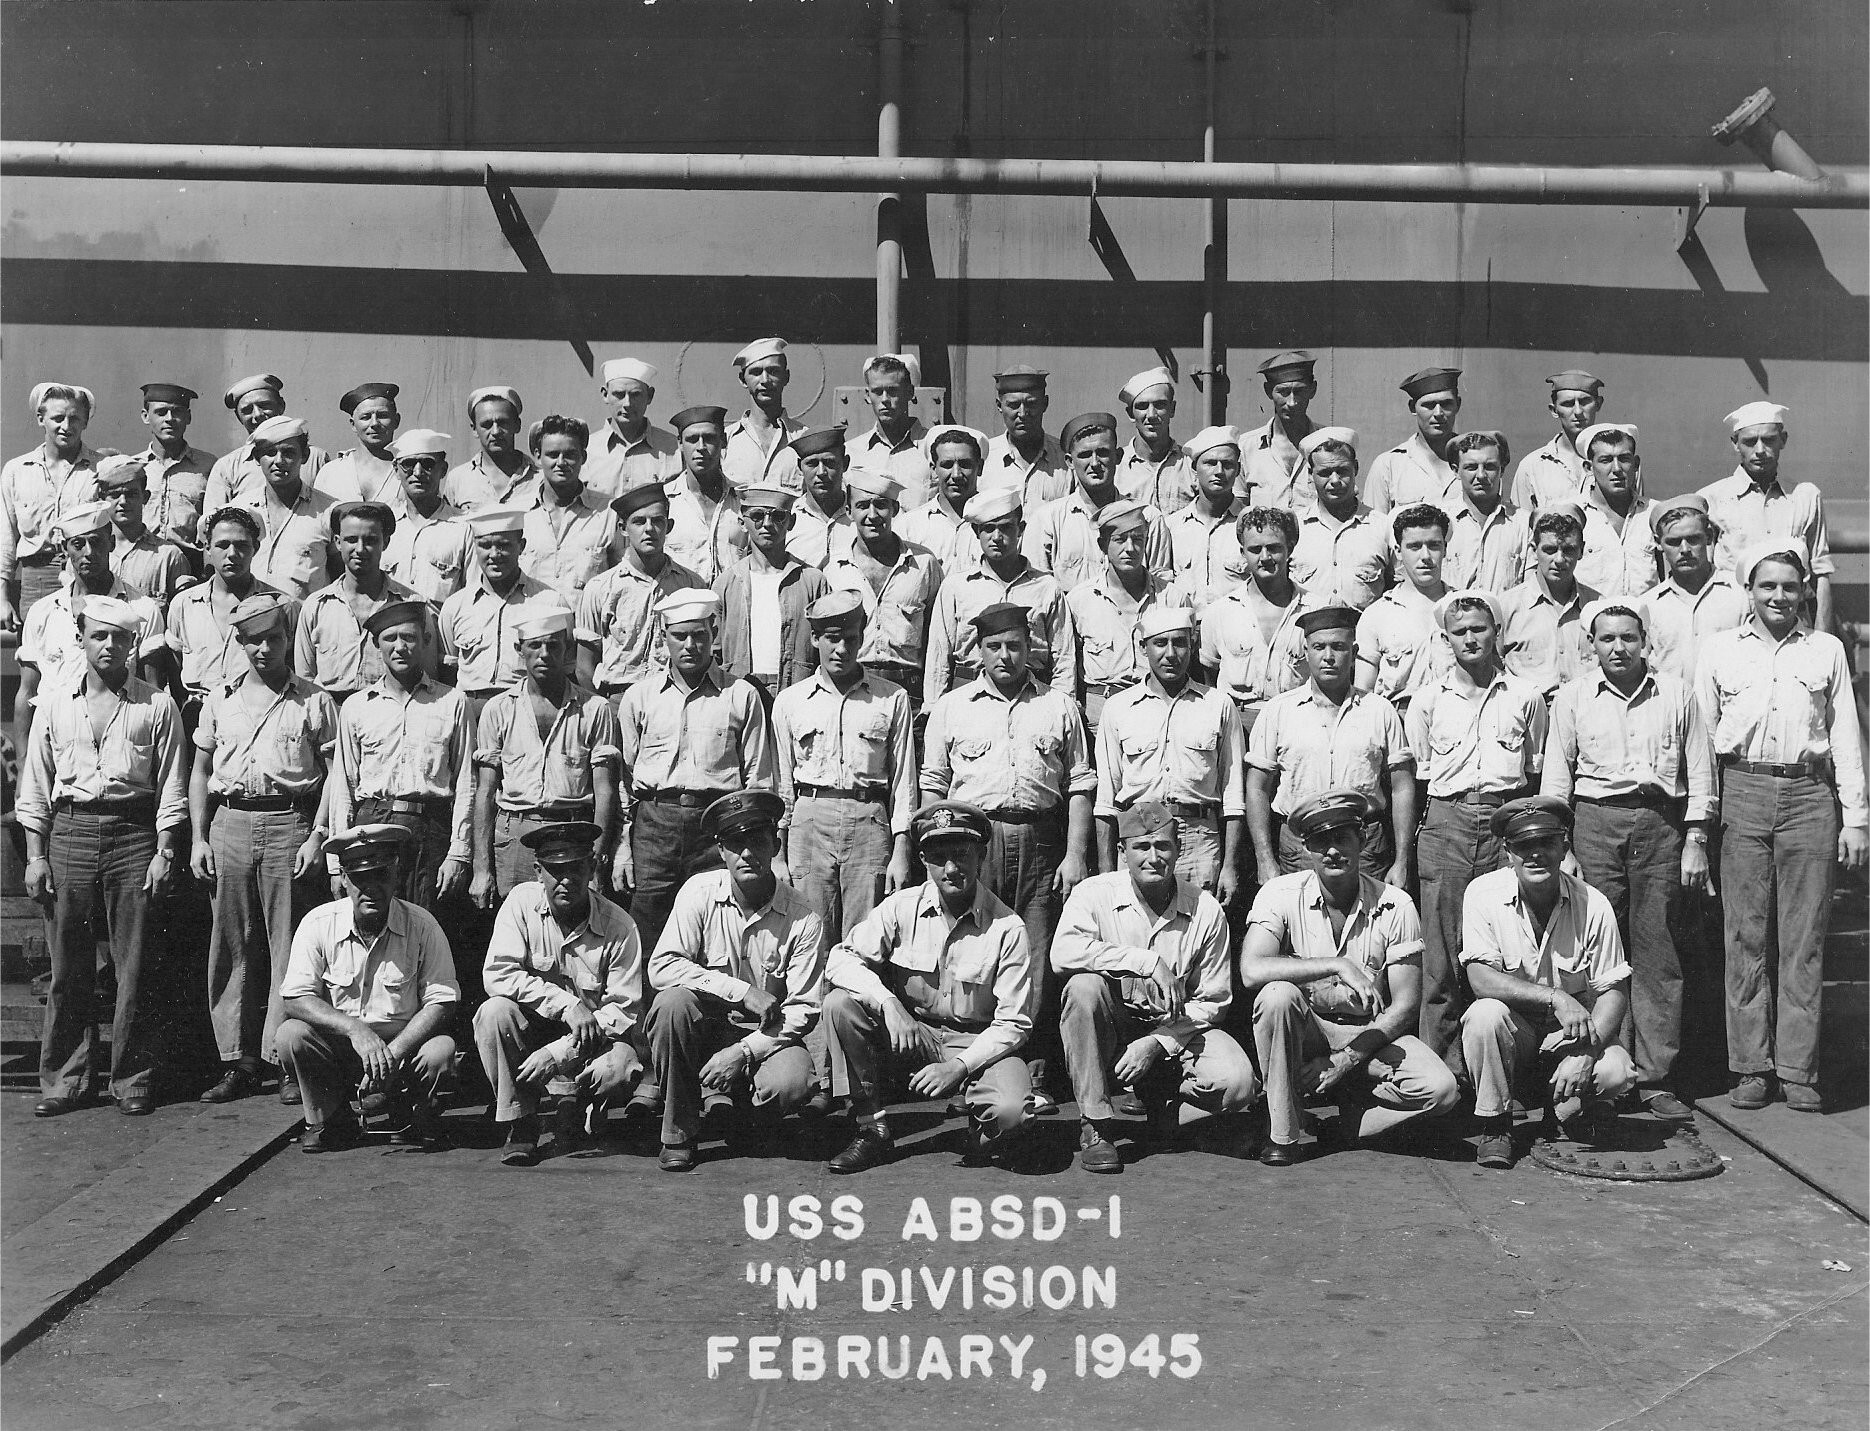 M Division of USS ABSD-1, Feb 1945; Ensign Arthur G. Crawford front row center